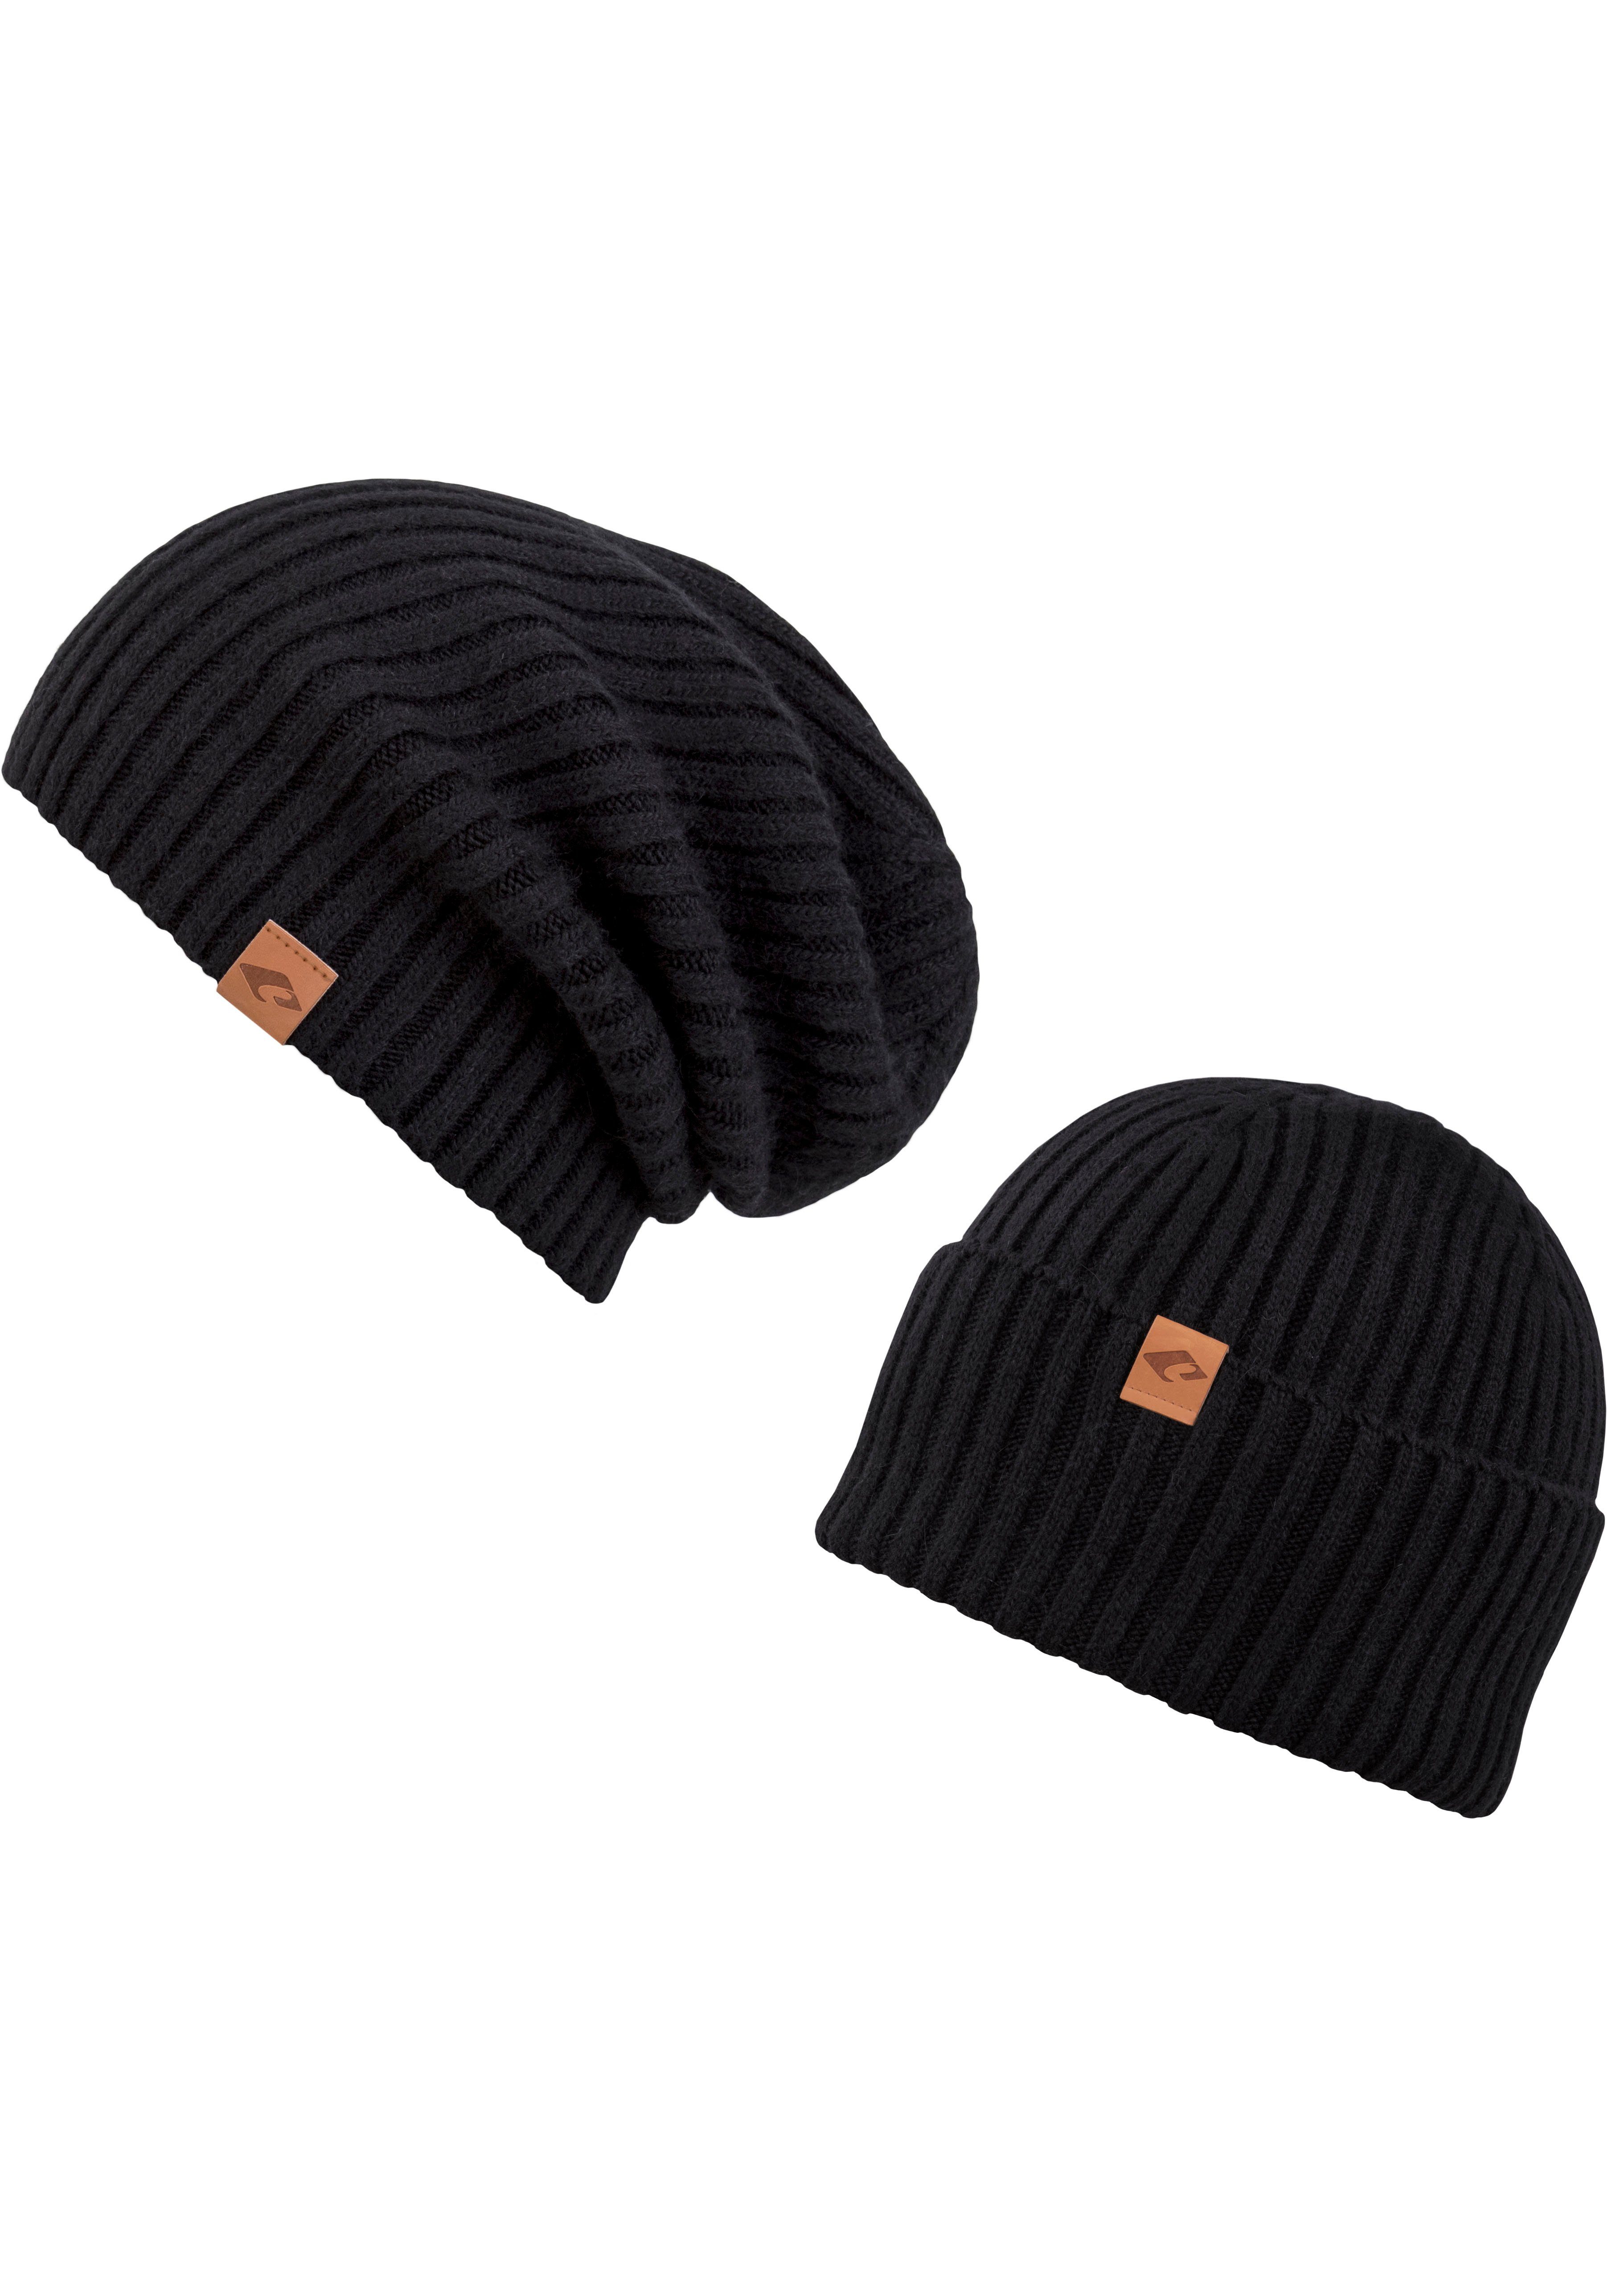 Hat Beanie Justin black chillouts